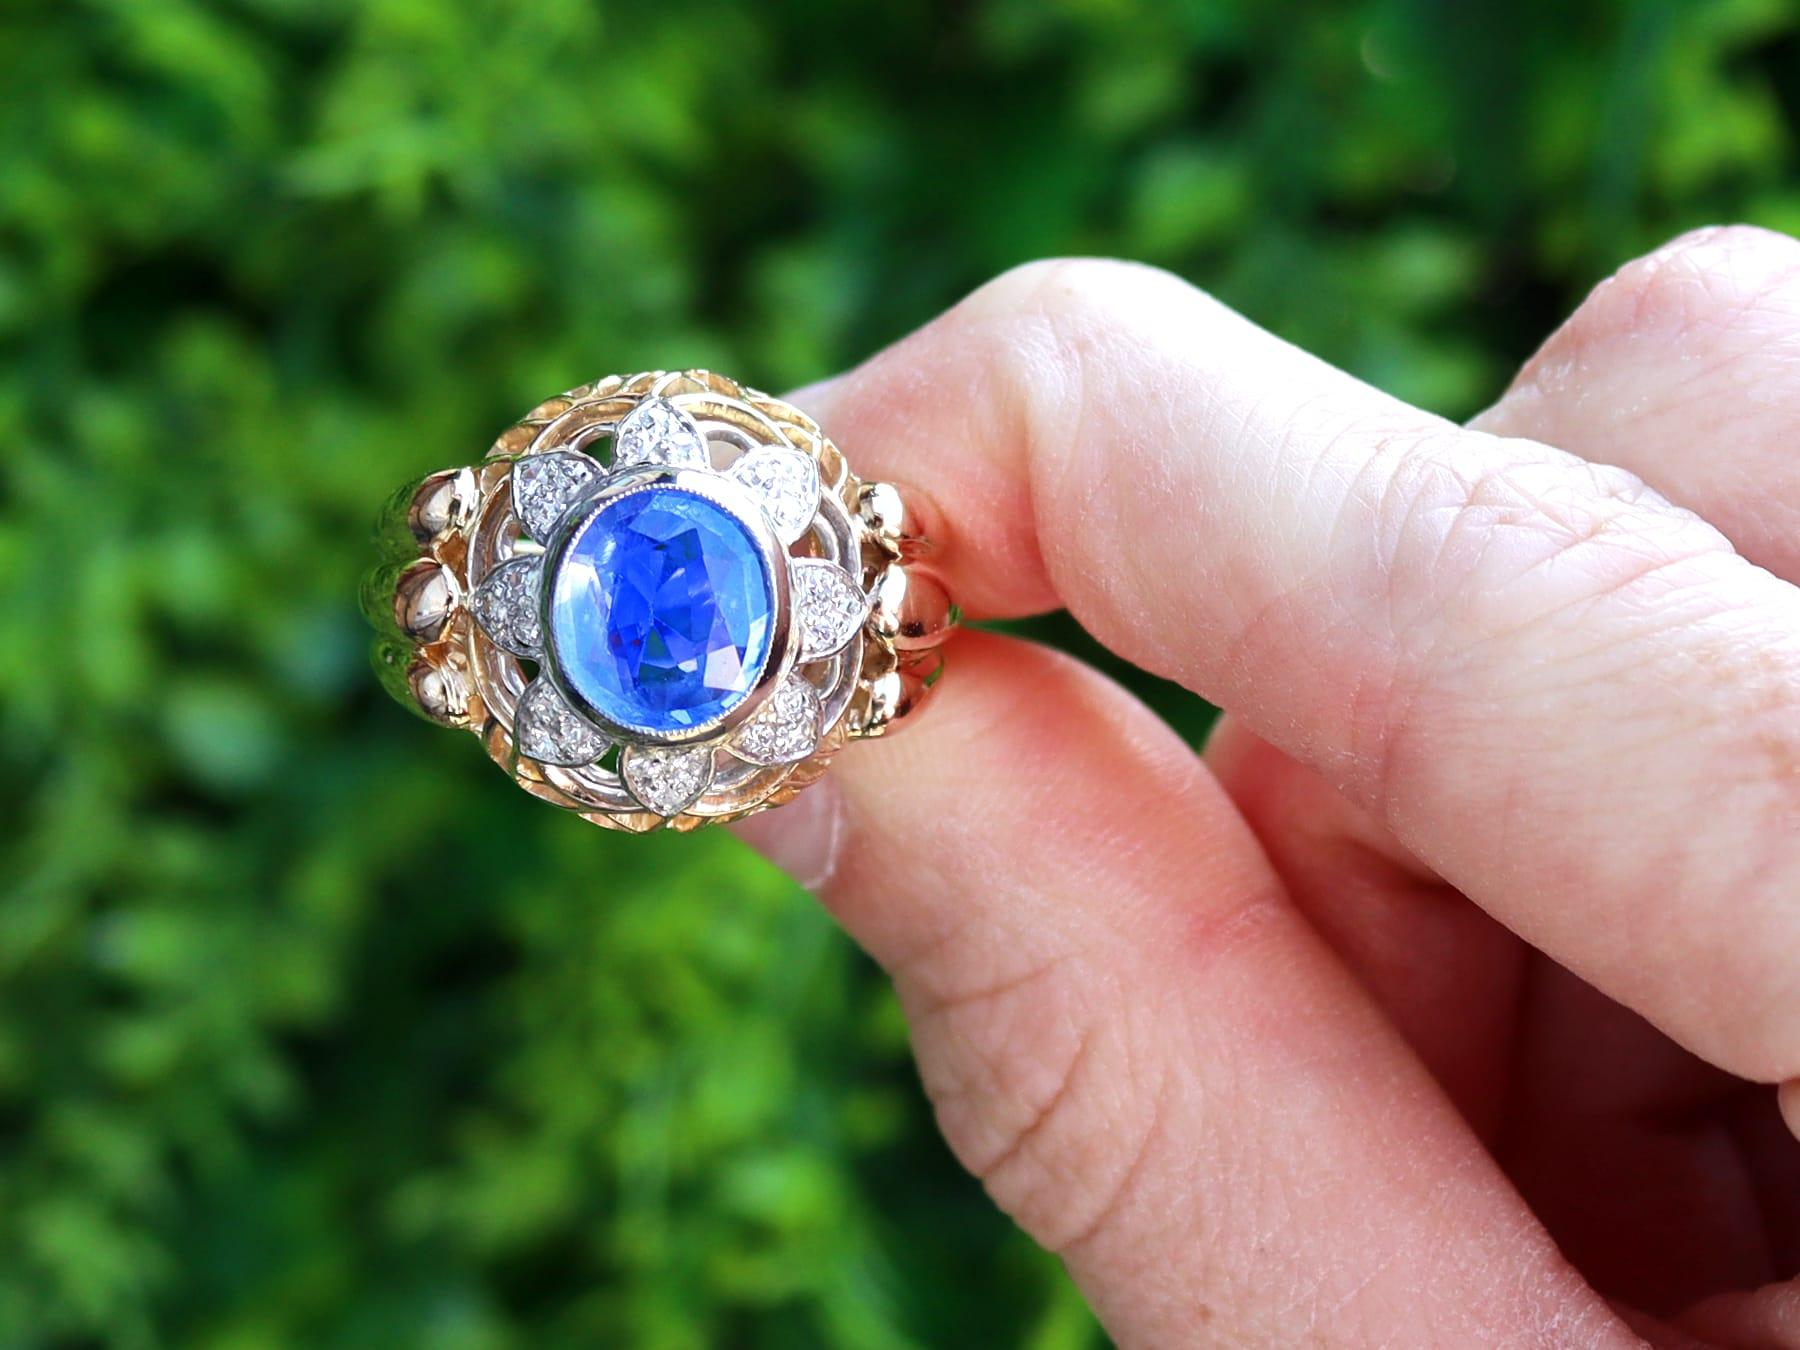 A stunning, fine and impressive vintage French 2.51 carat Ceylon sapphire and 0.24 carat diamond, 18 karat yellow gold and platinum set dress ring; part of our fine collection of Ceylon sapphires.

This stunning, fine and impressive sapphire and